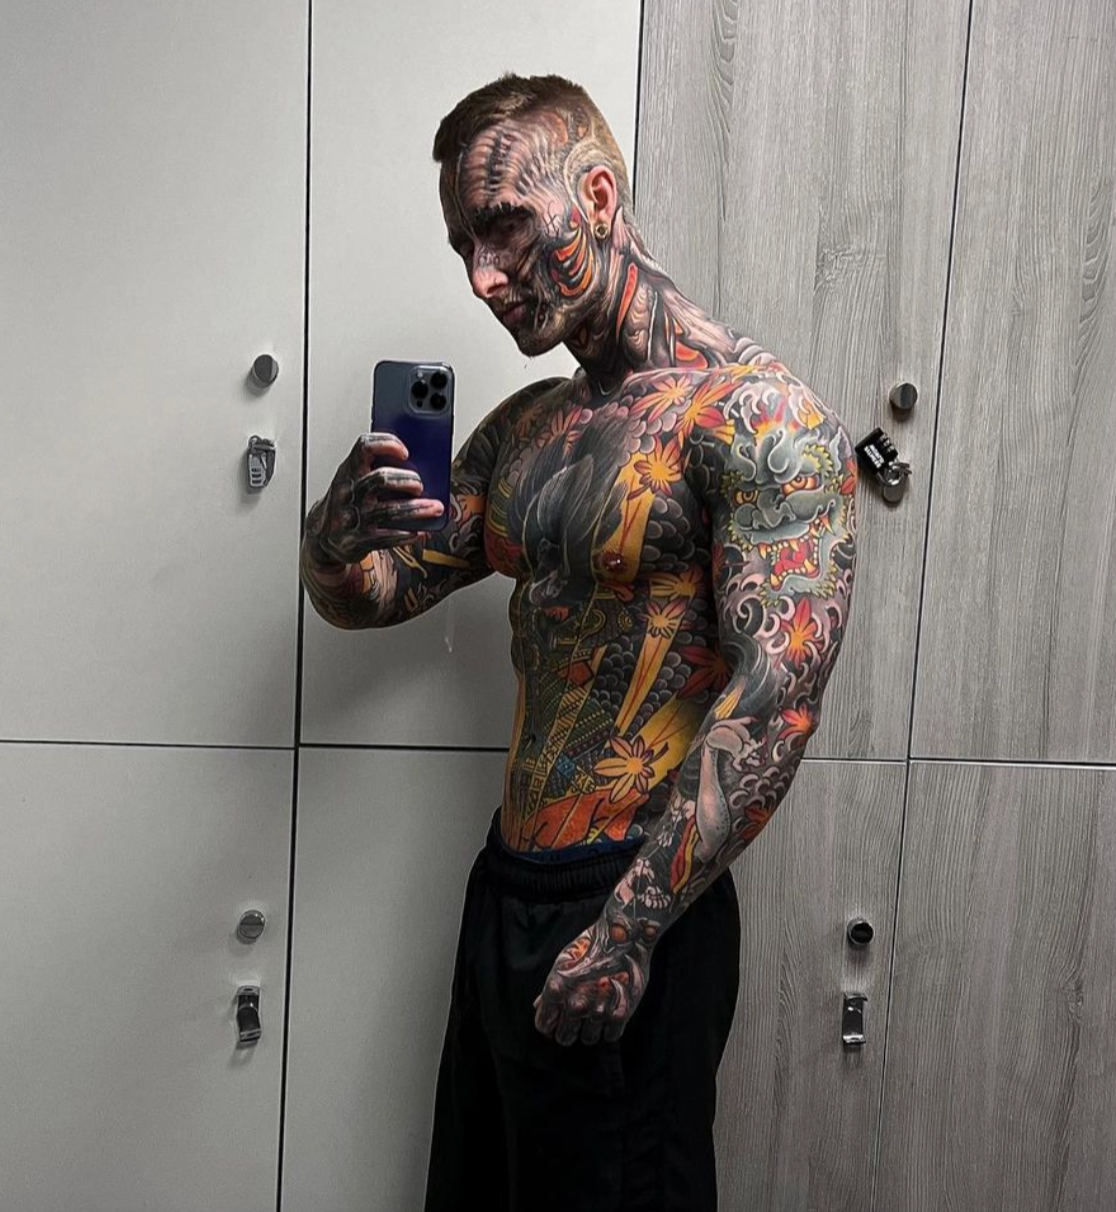 Man Unrecognisable After Covering 95 Per Cent of Body In Extreme Tattoos